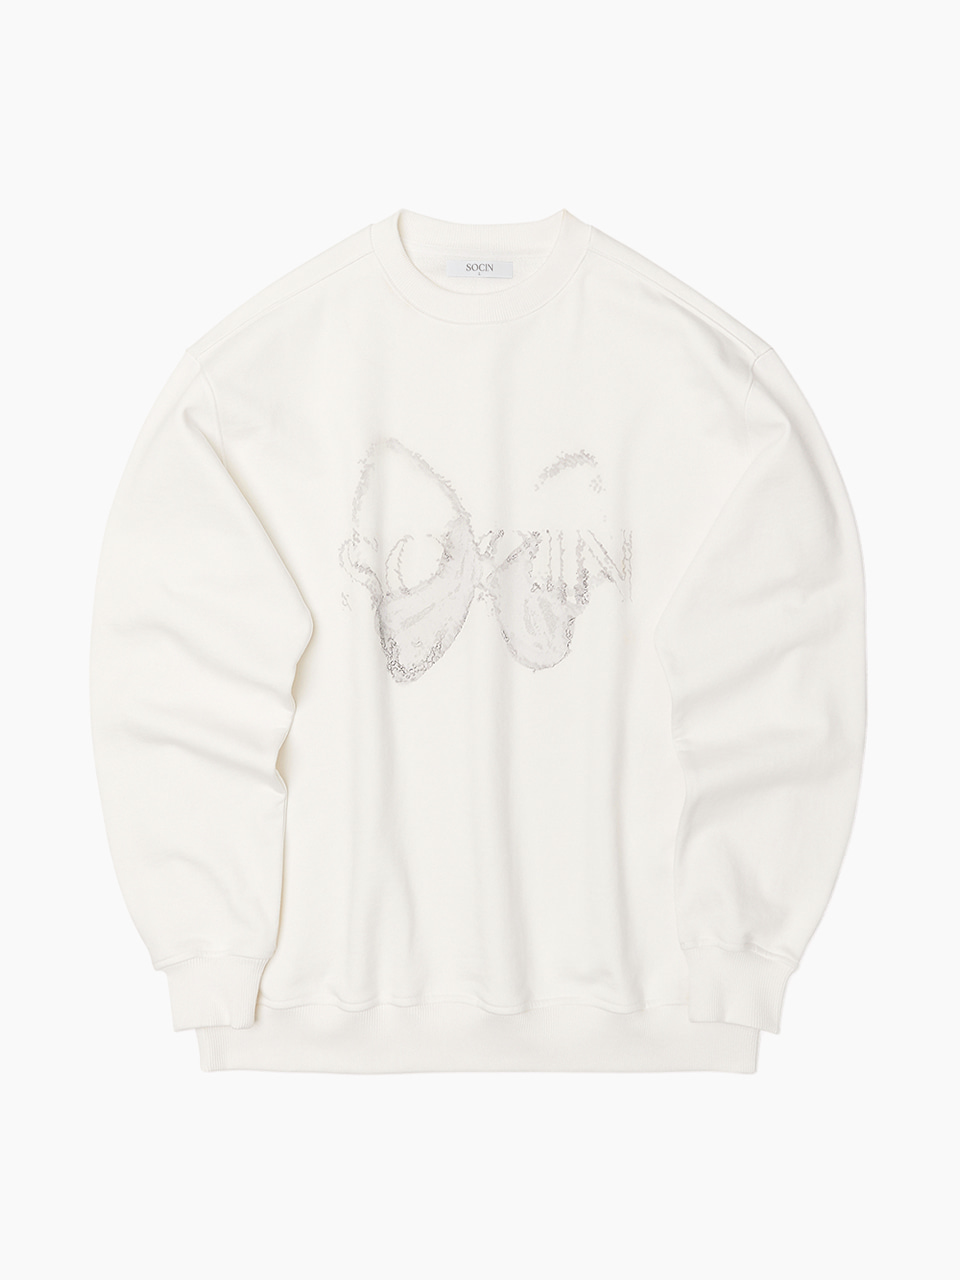 Abstract Butterfly Printed Sweatshirts (White)